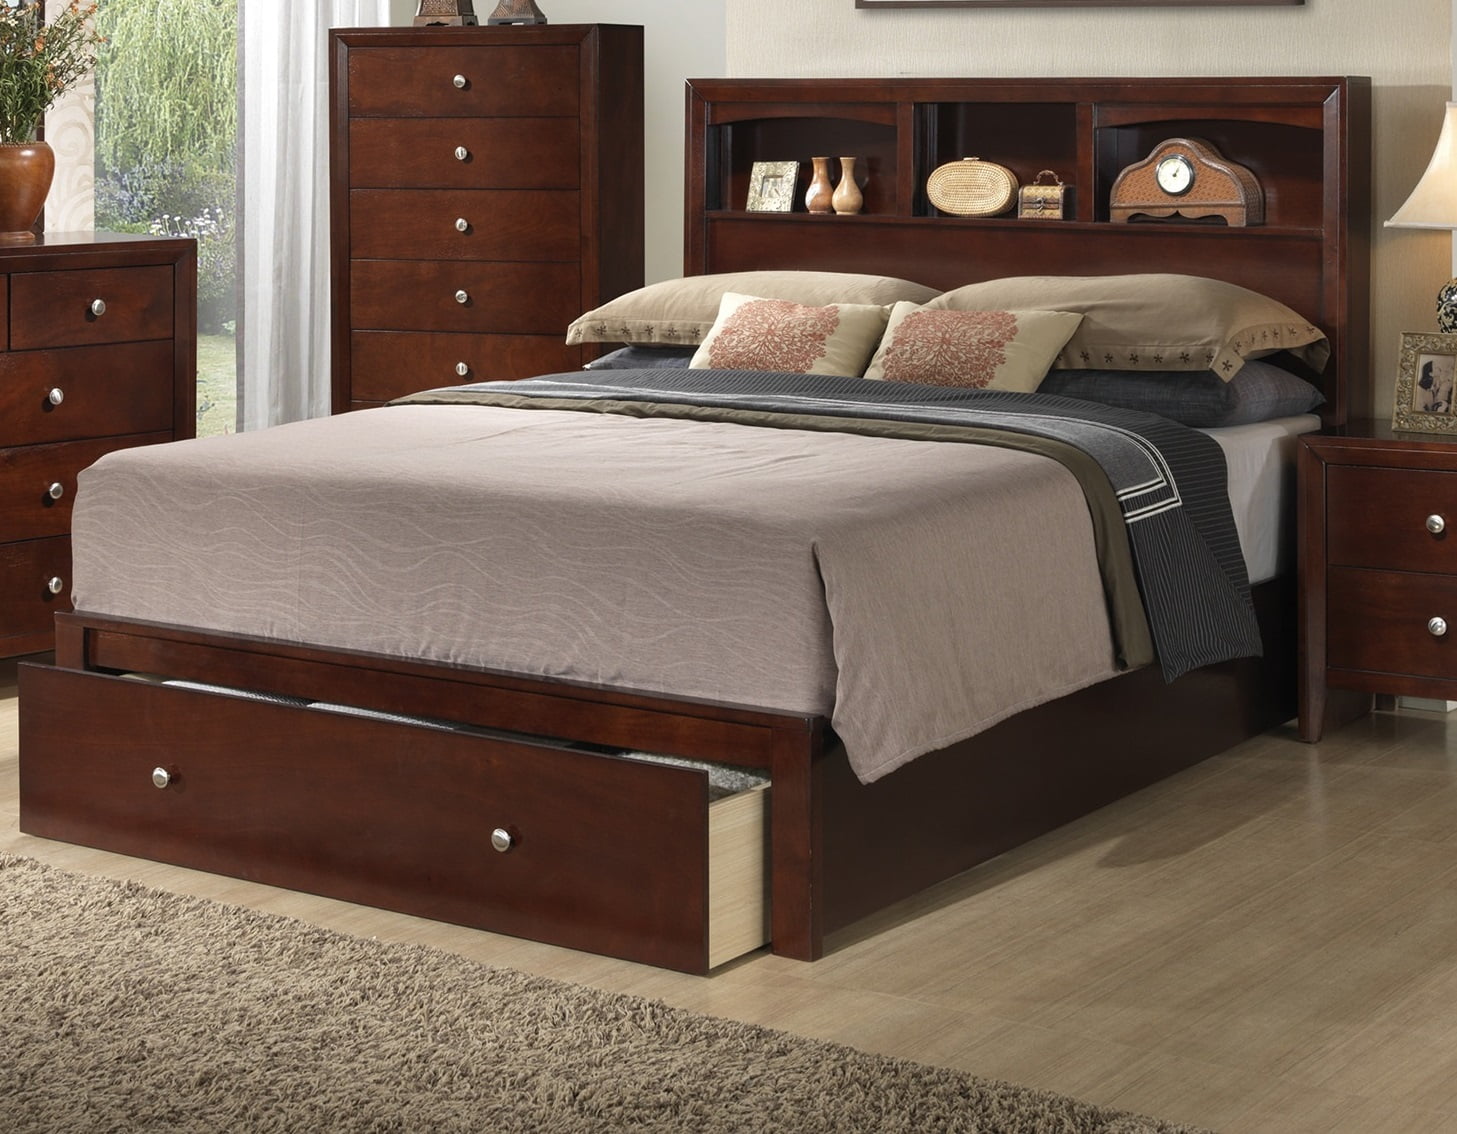 Bedroom Furniture 1pc Eastern King Size, King Bed With Drawers Under